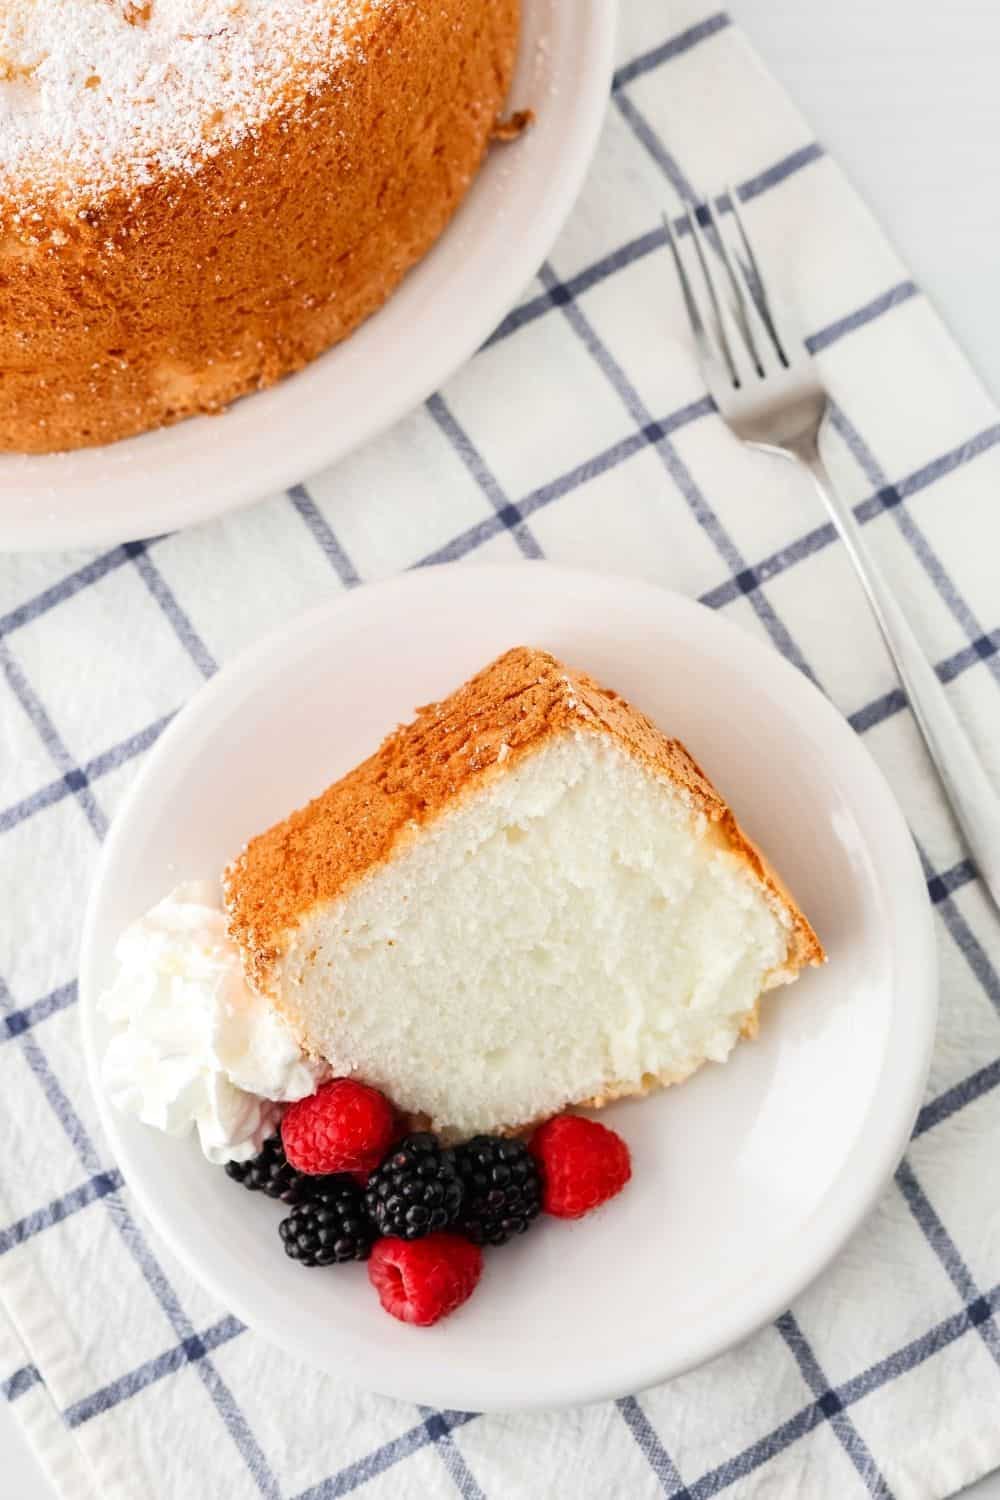 overhead view of a slice of angel food cake with berries and cream on a white plate, showing the fluffy interior.